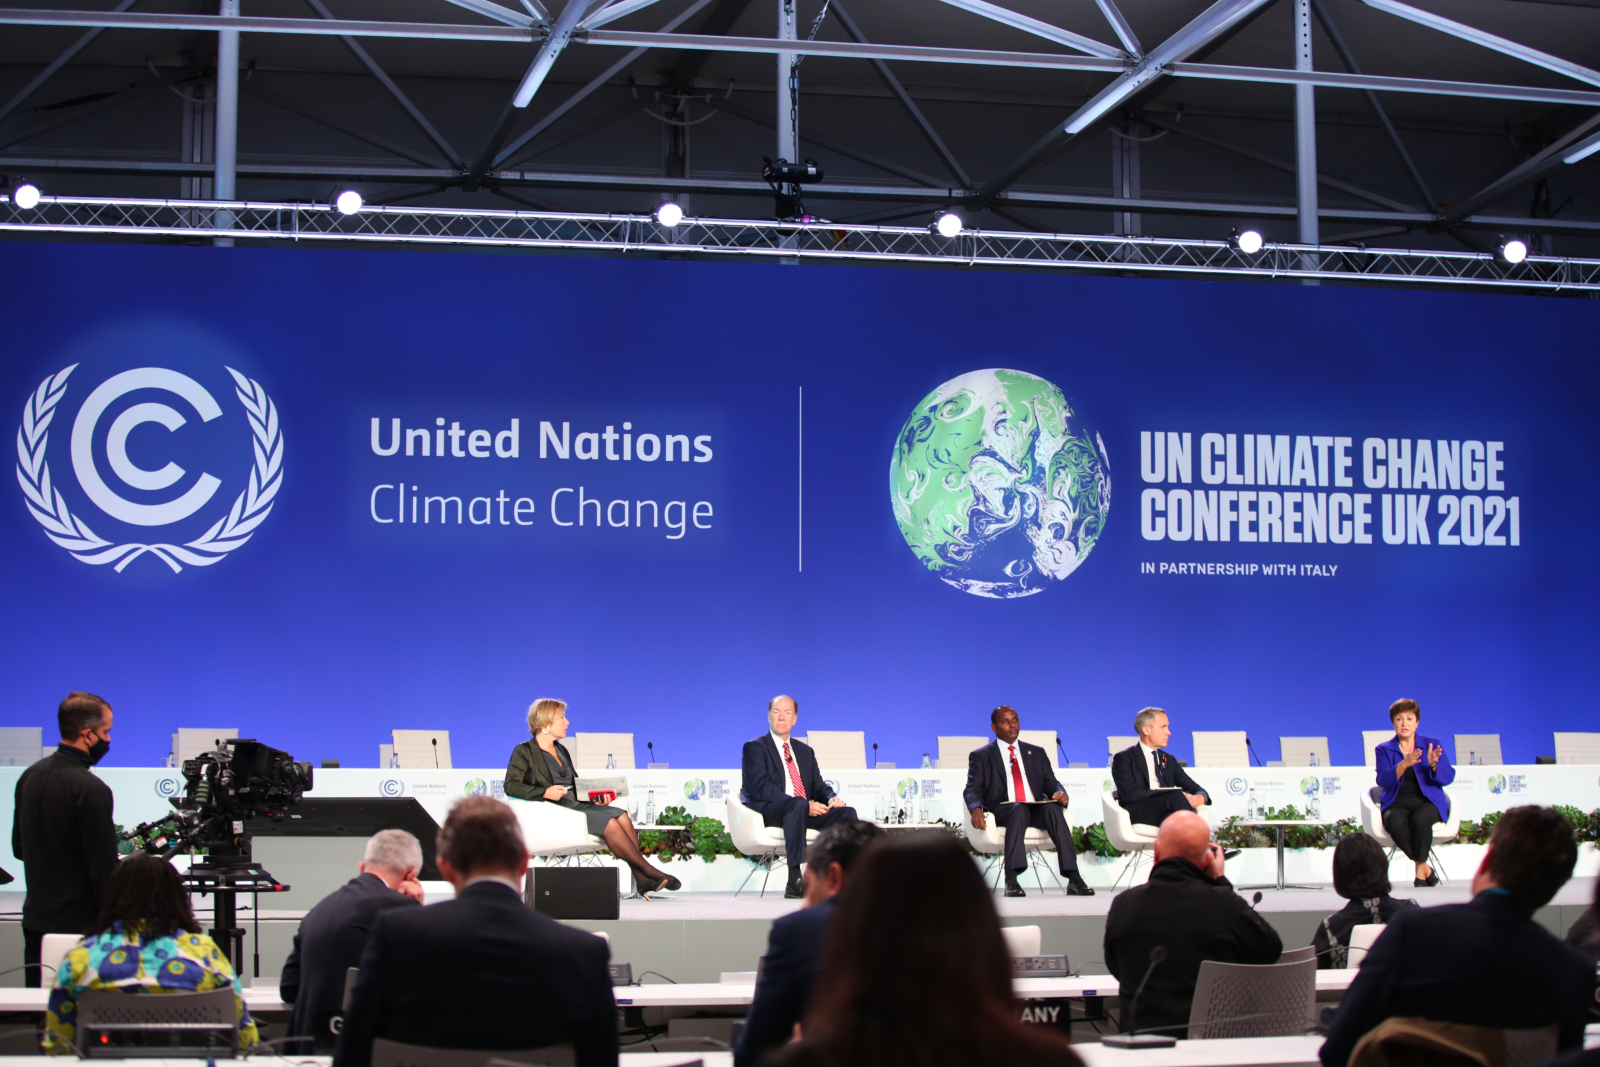 Five people sit on a stage at COP26 in Glasgow, with a blue background that reads United Nations Climate Change behind them